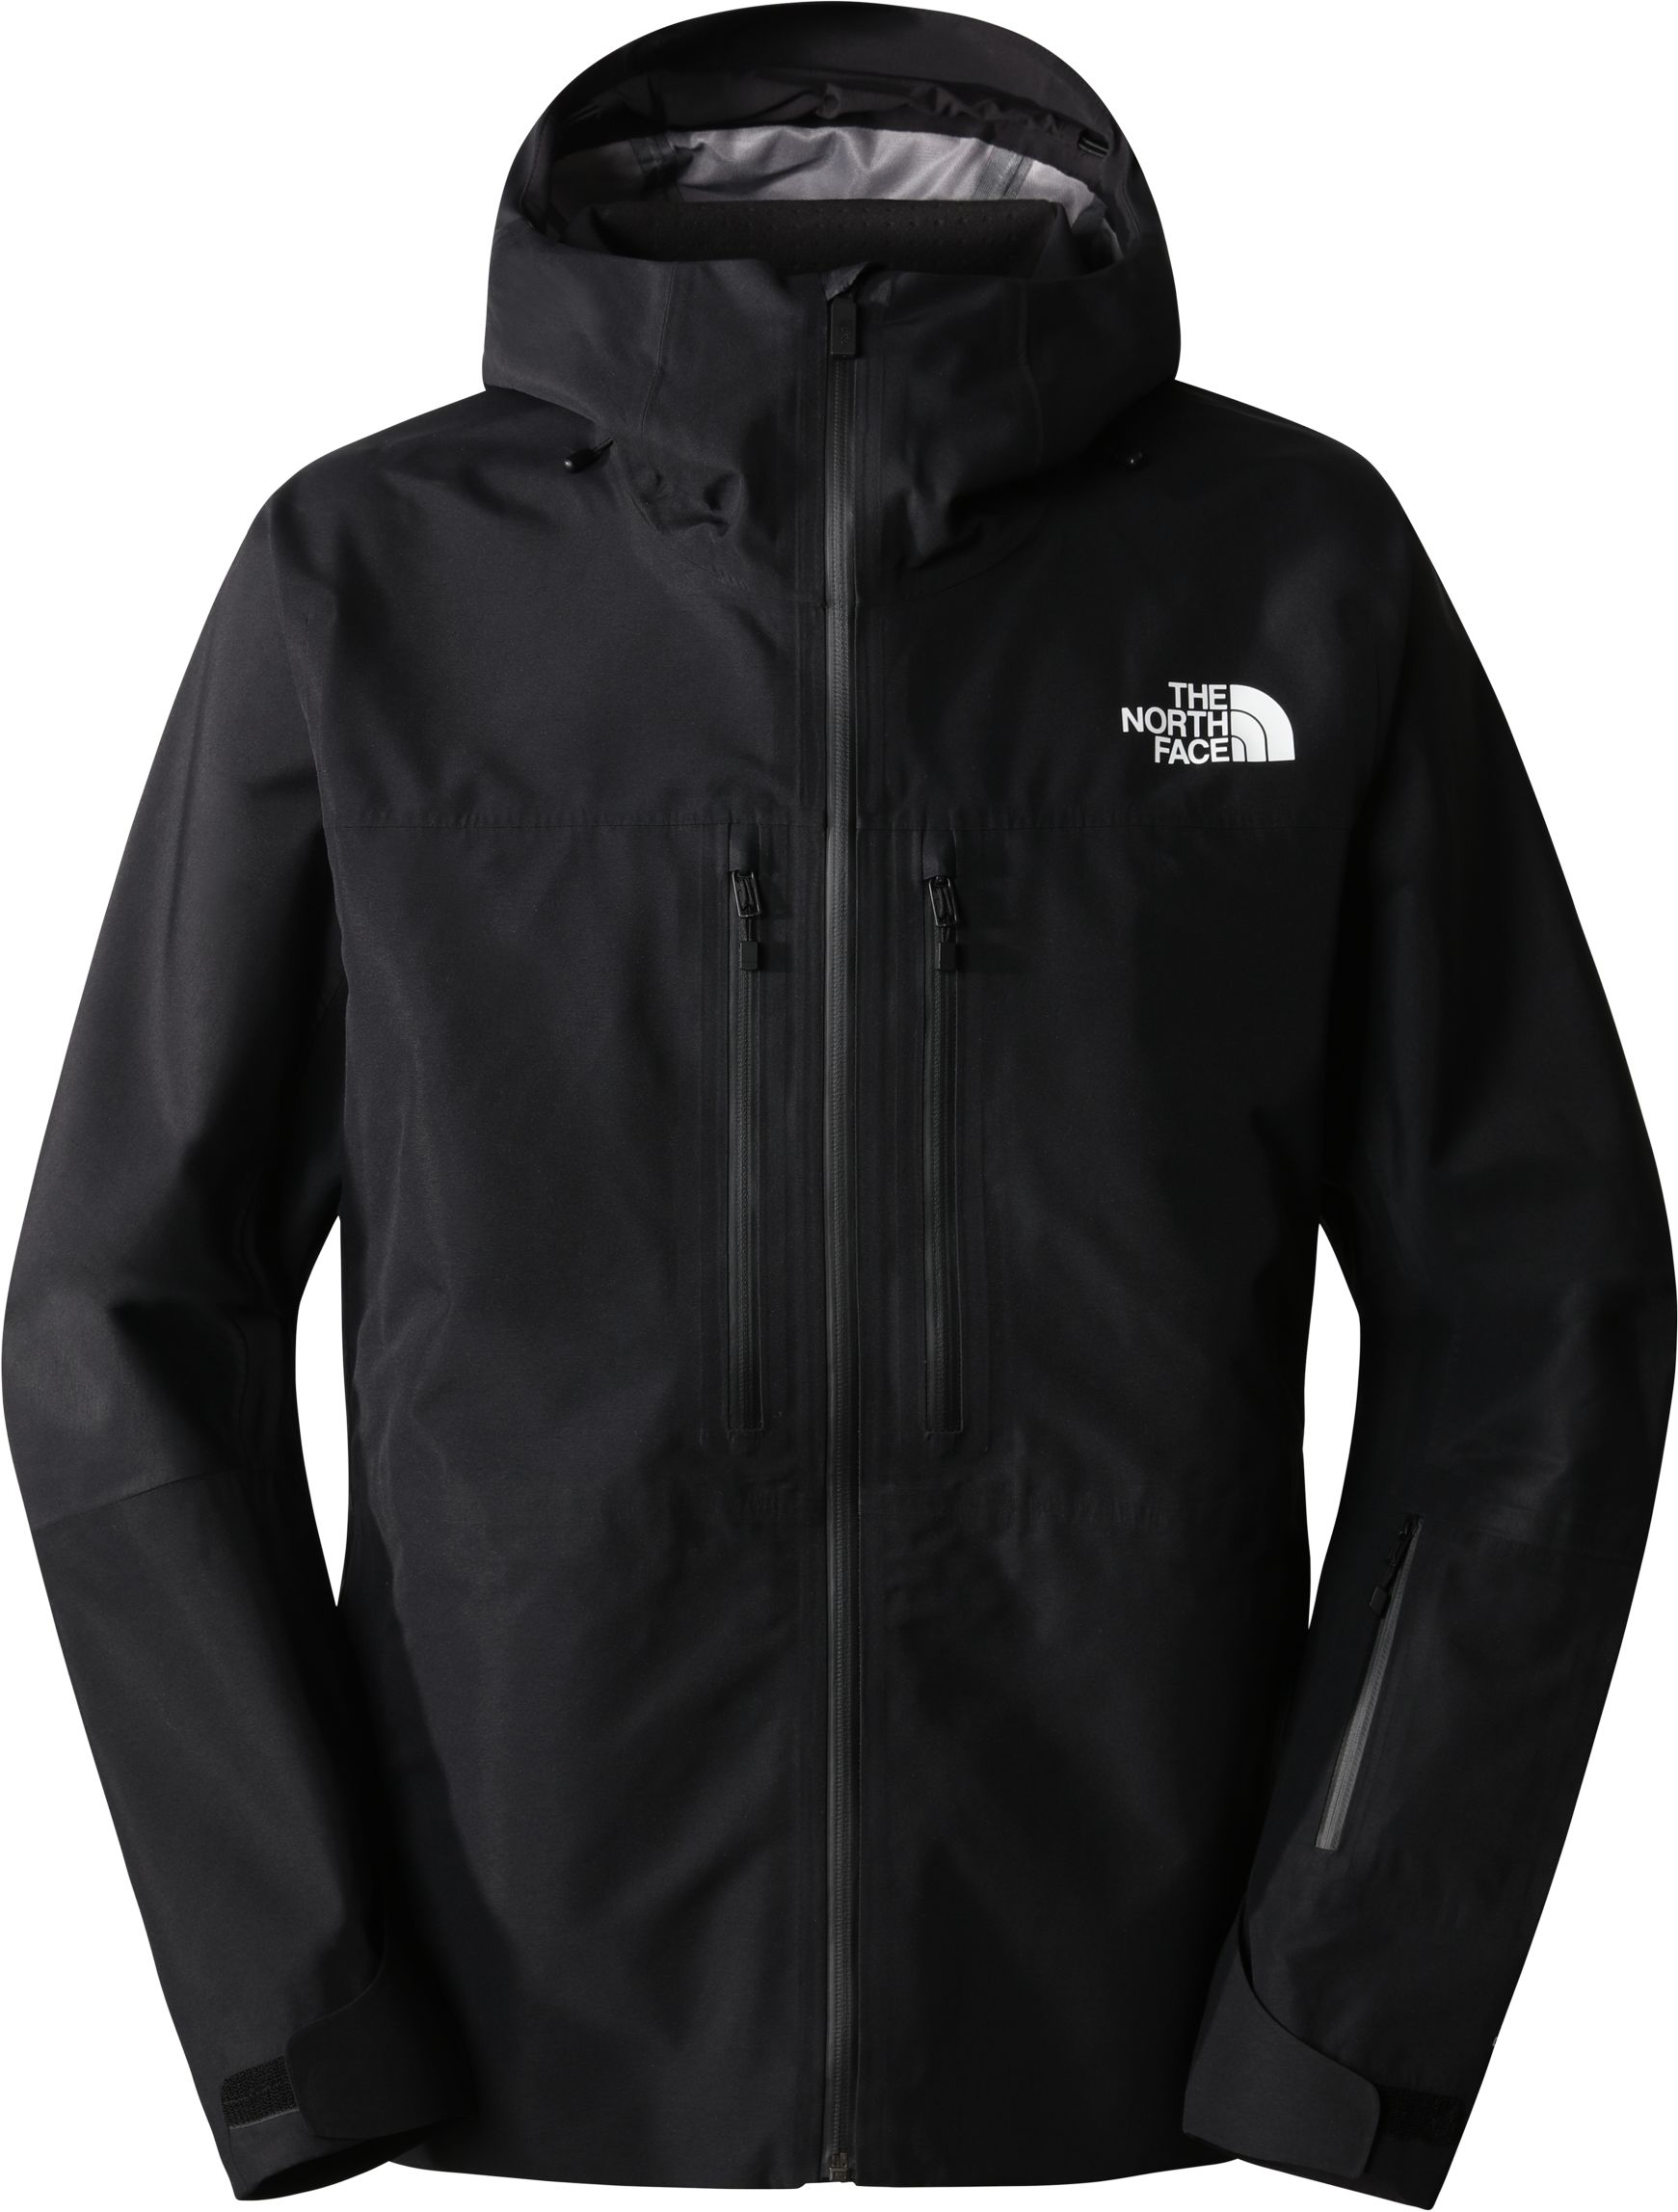 THE NORTH FACE, M CEPTOR JKT